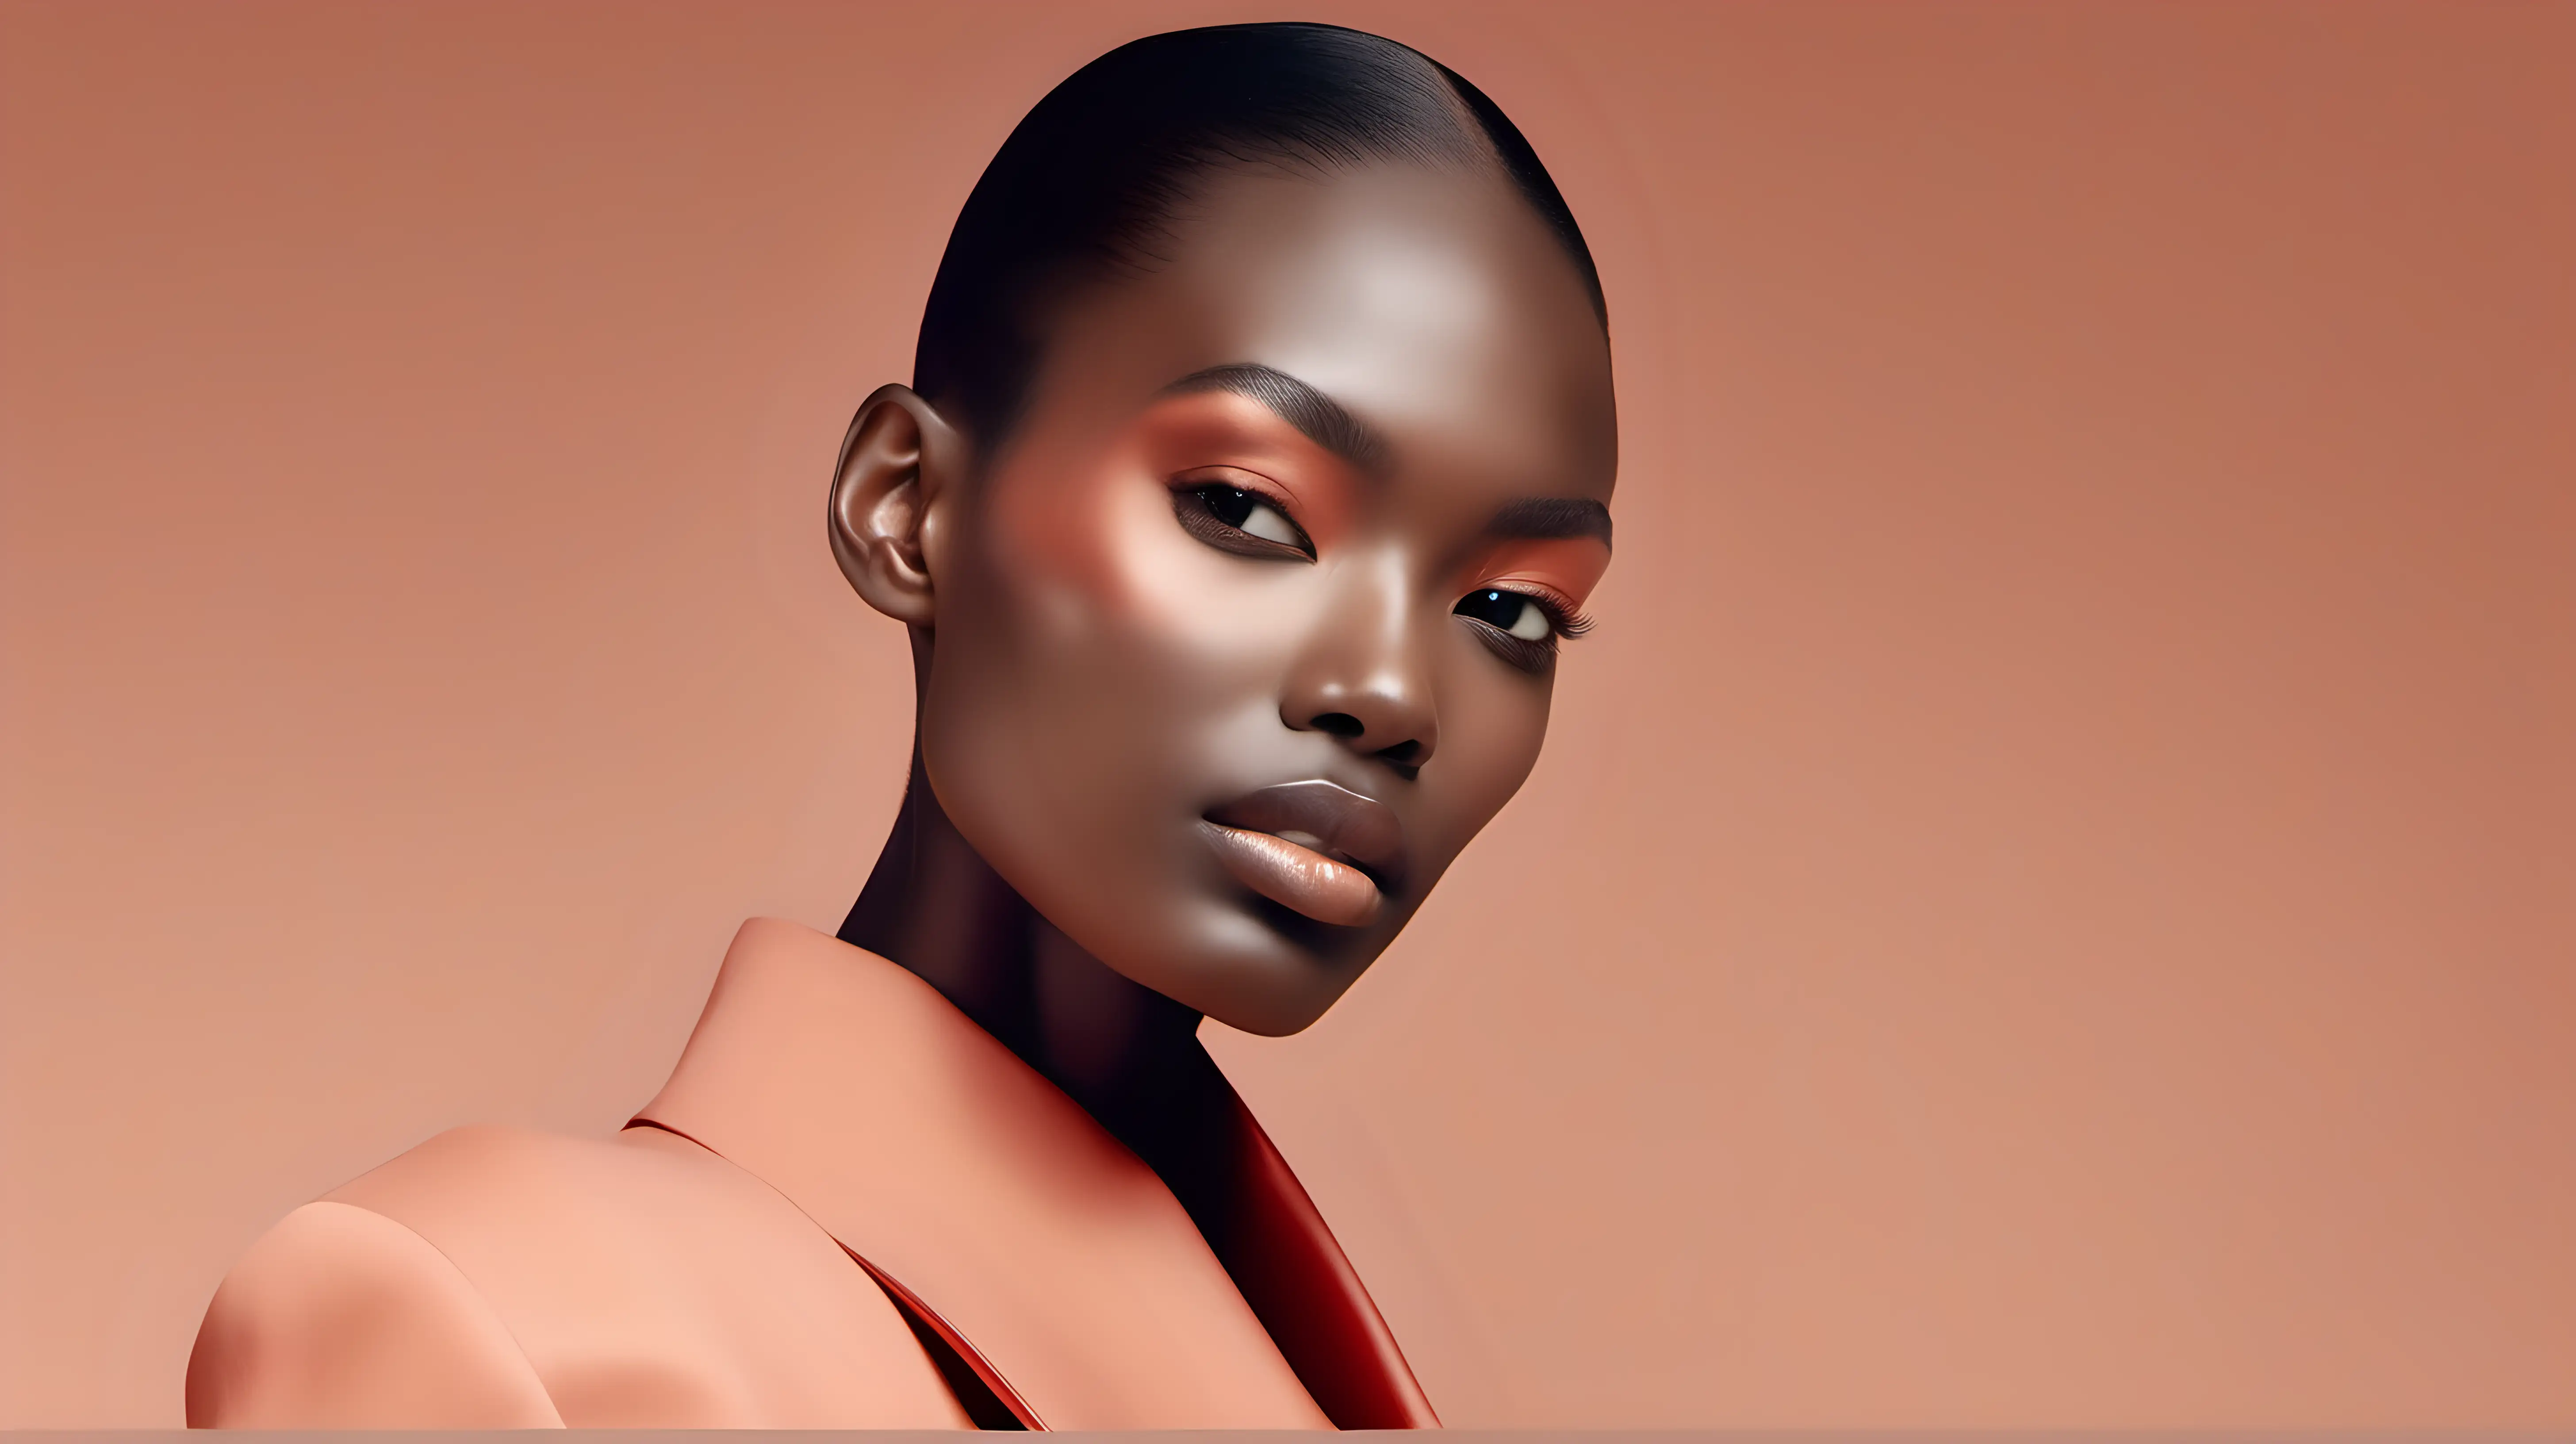 "Embody modern minimalism as a model graces a muted coral backdrop, dressed in chic simplicity, with high-resolution precision spotlighting the nuance in every facial expression."